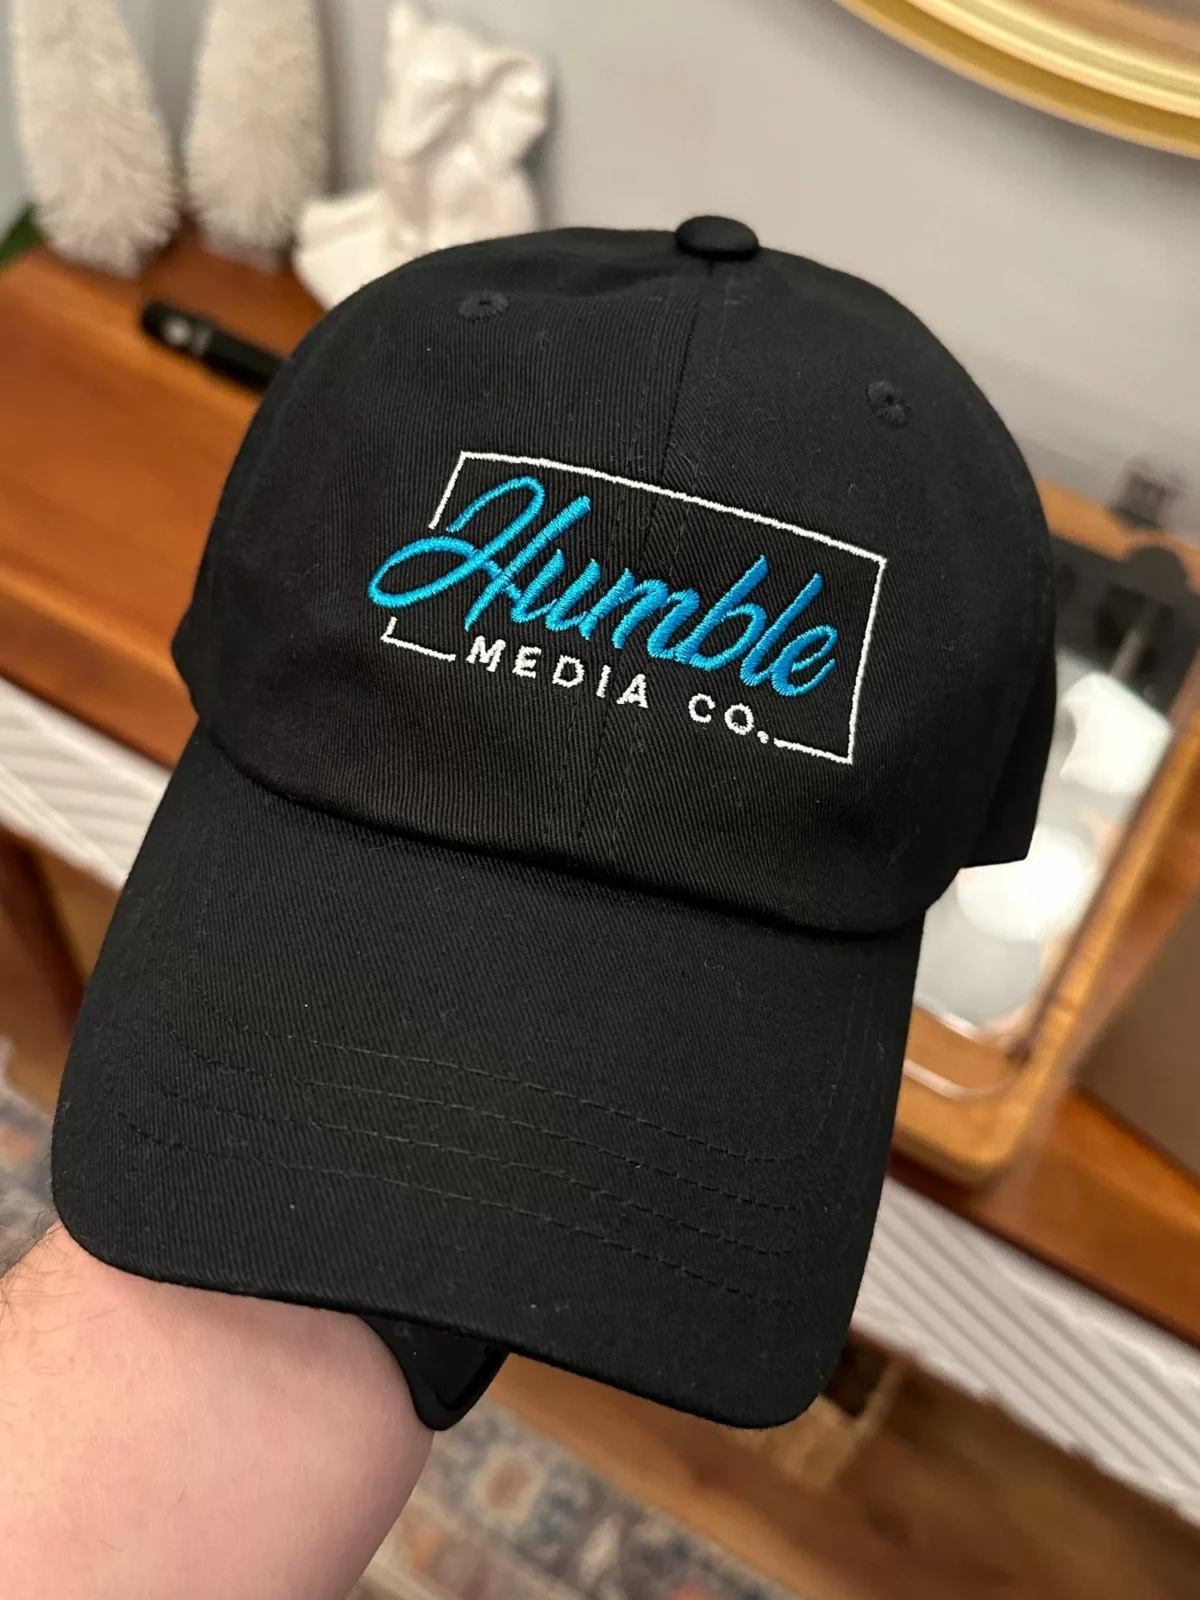 casquette brodee personnalisee client